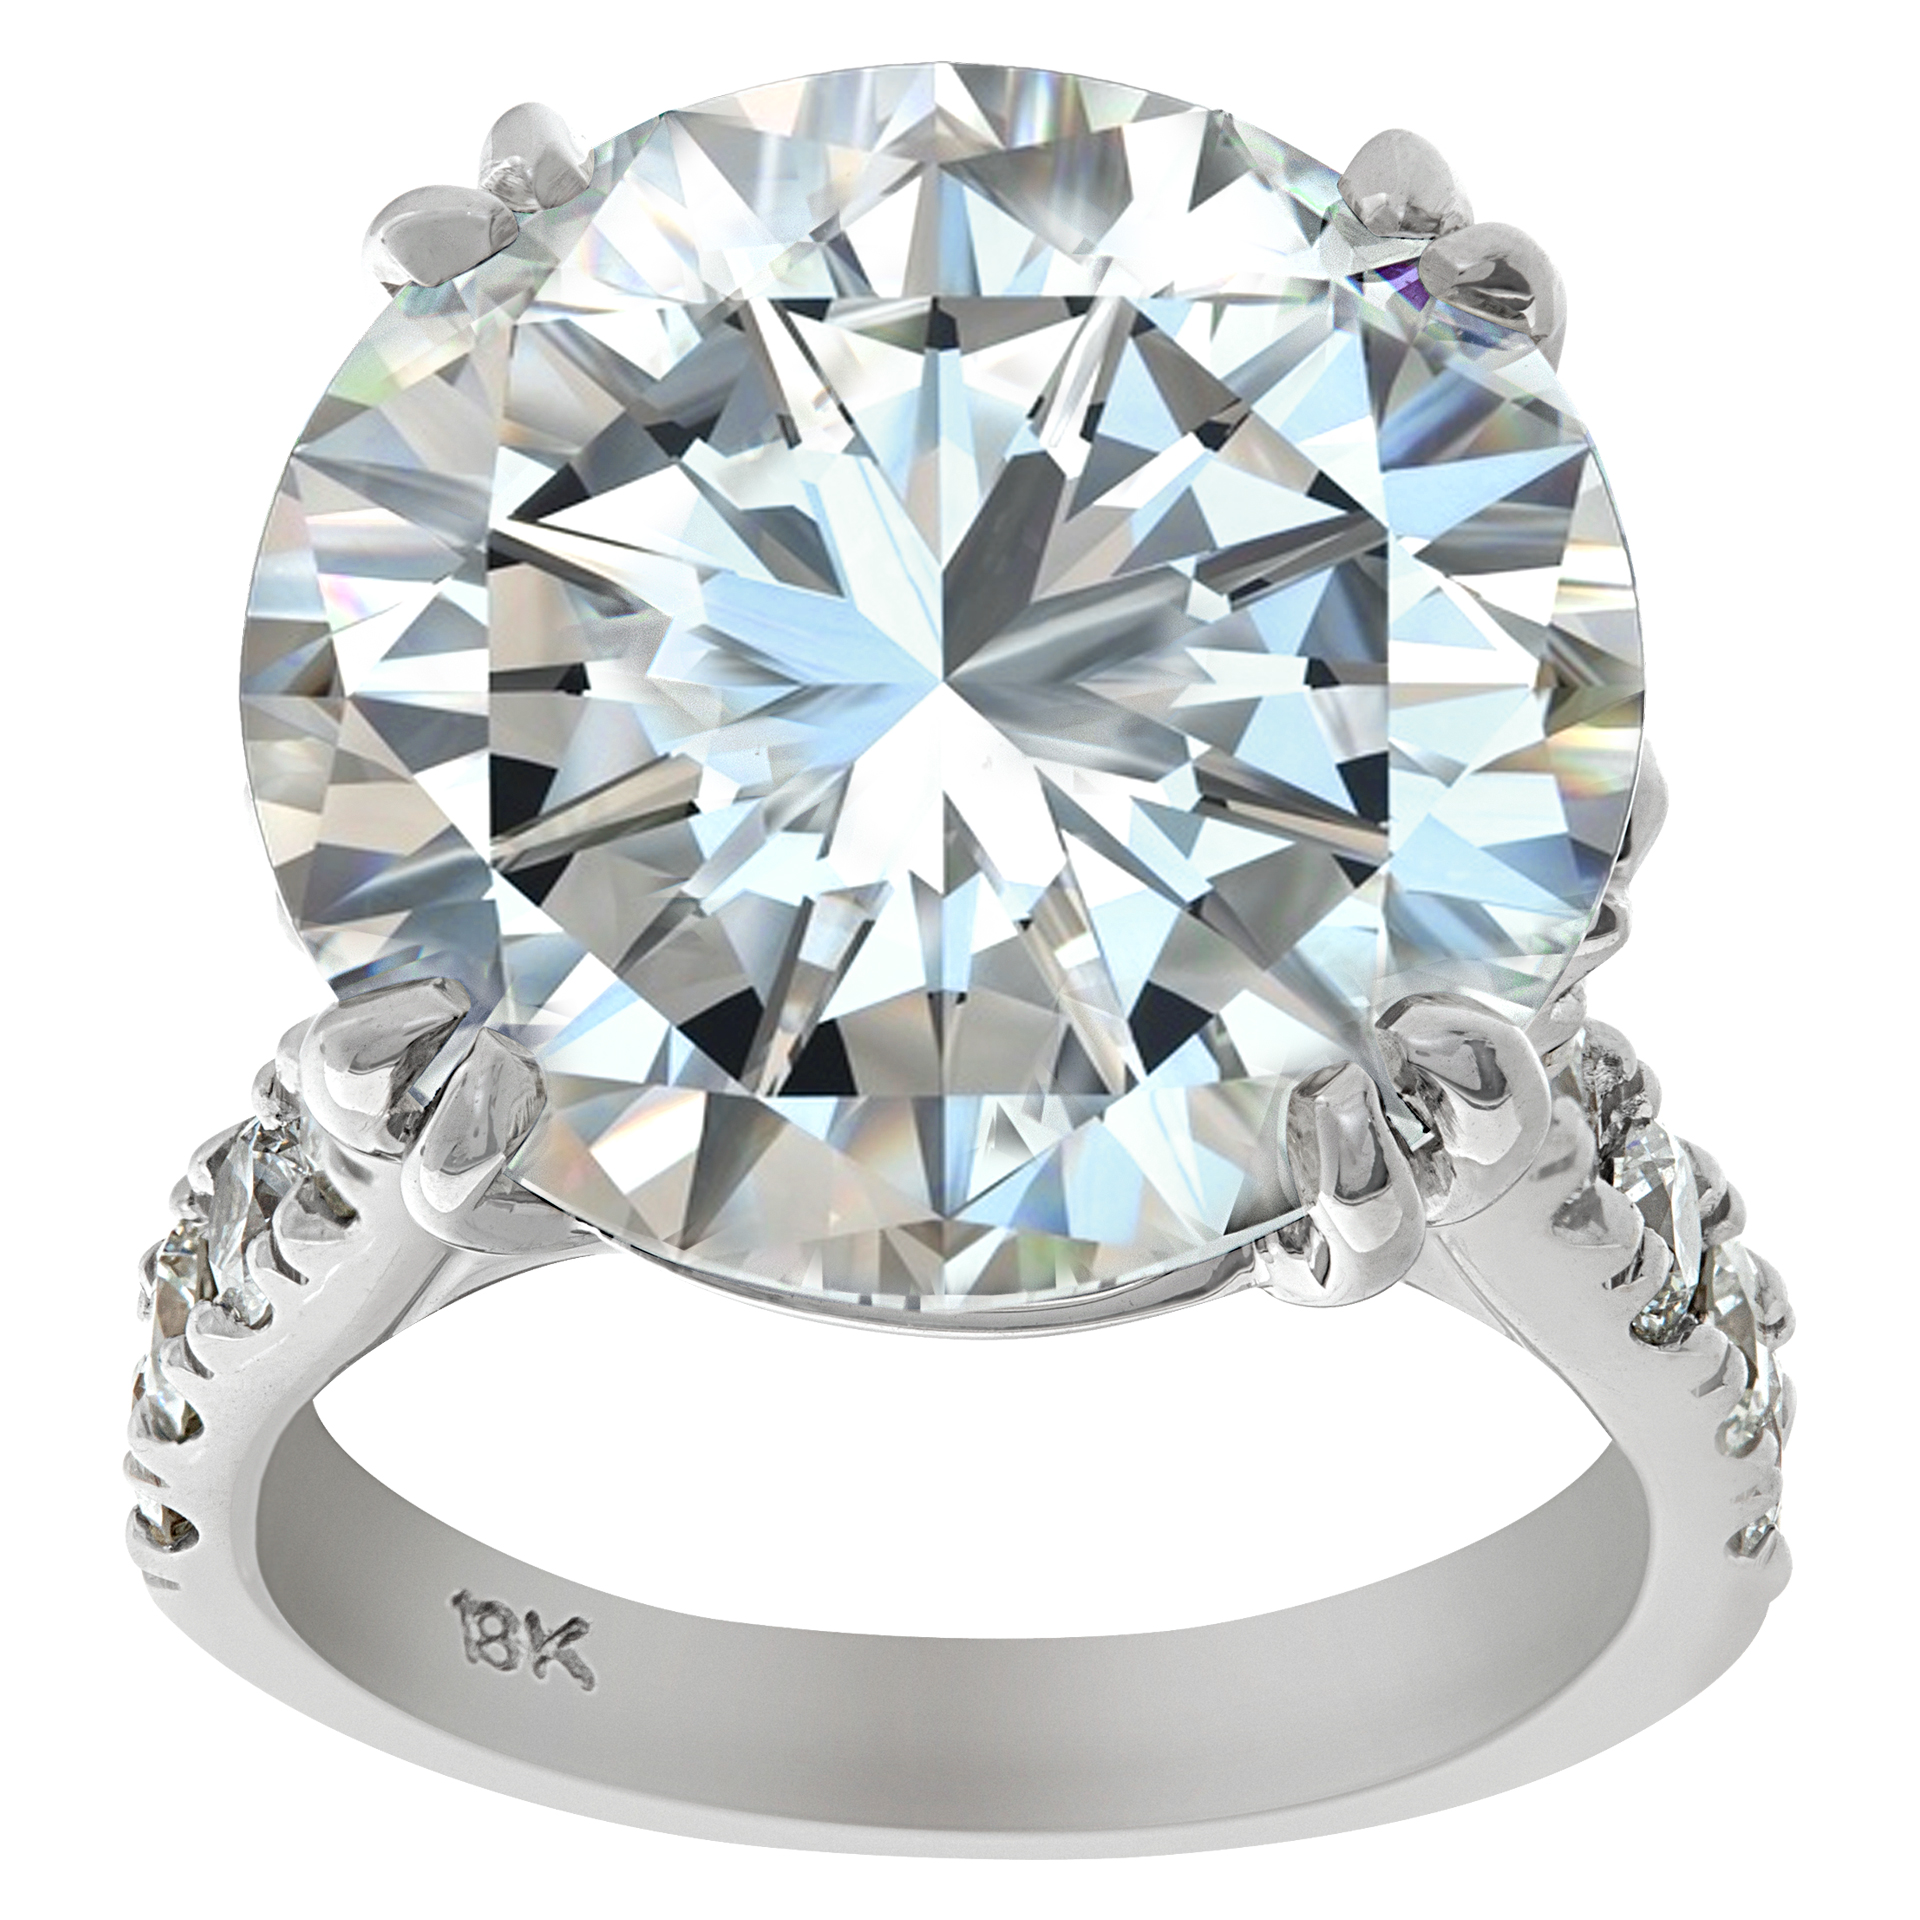 GIA Certified diamond ring with center round diamond 16.92 carats I color, VS2 clarity image 1